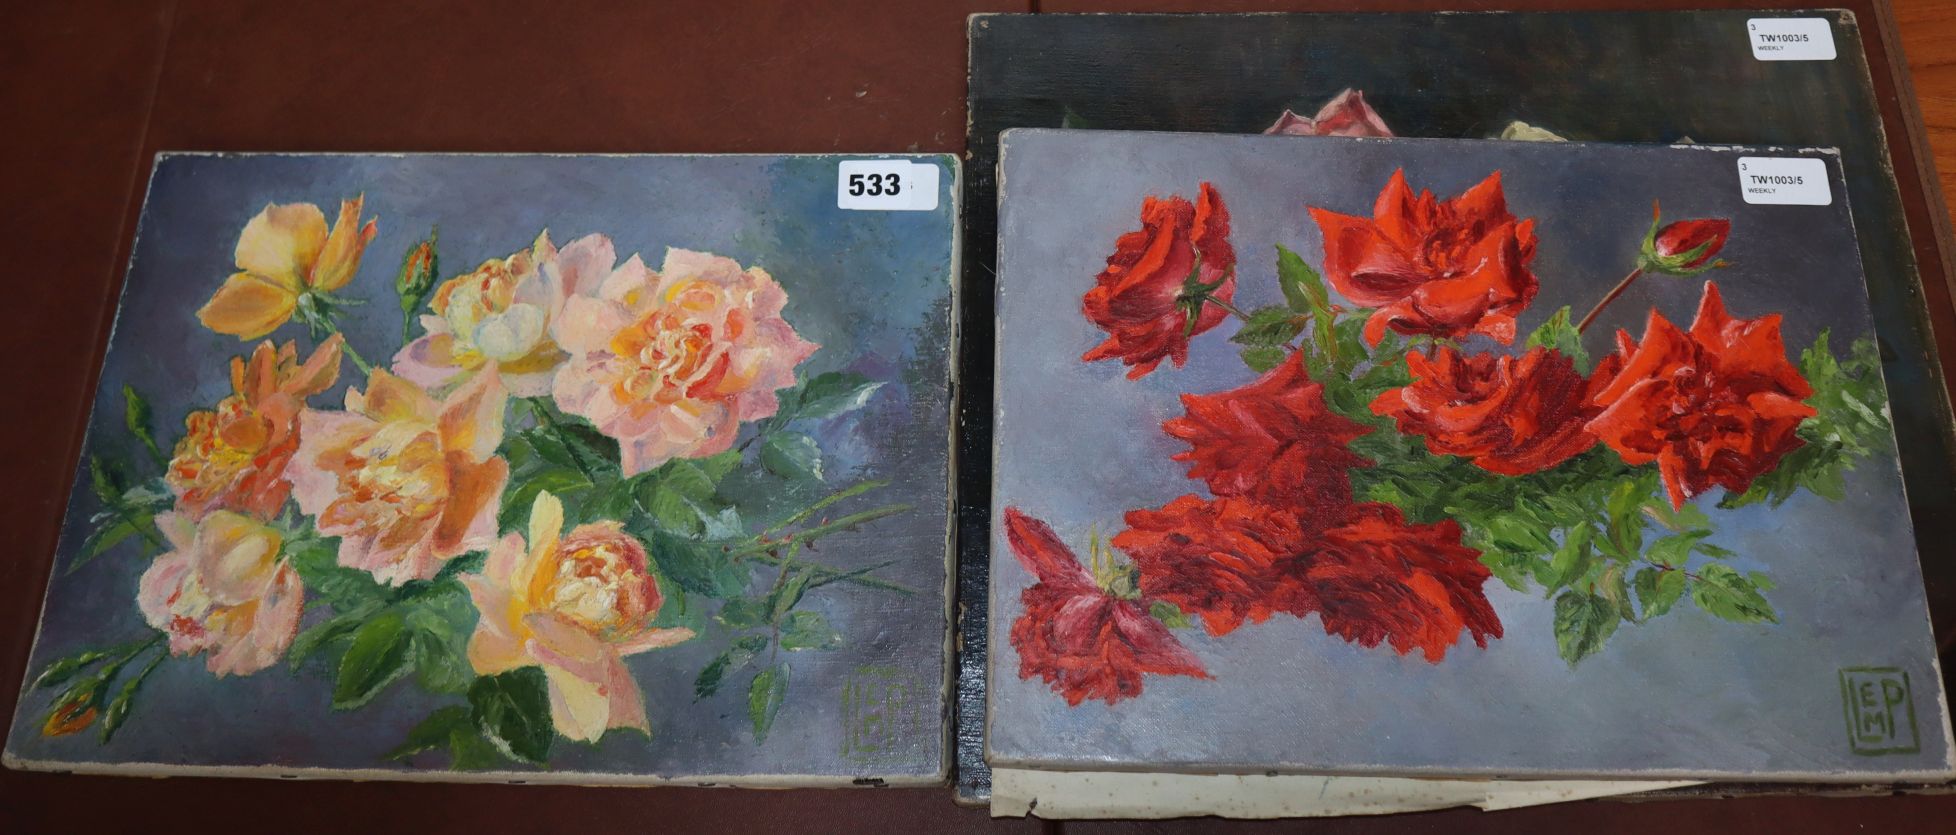 Katharina L. Beard, roses in a glass vase, inscribed verso and two other oils on canvas of roses